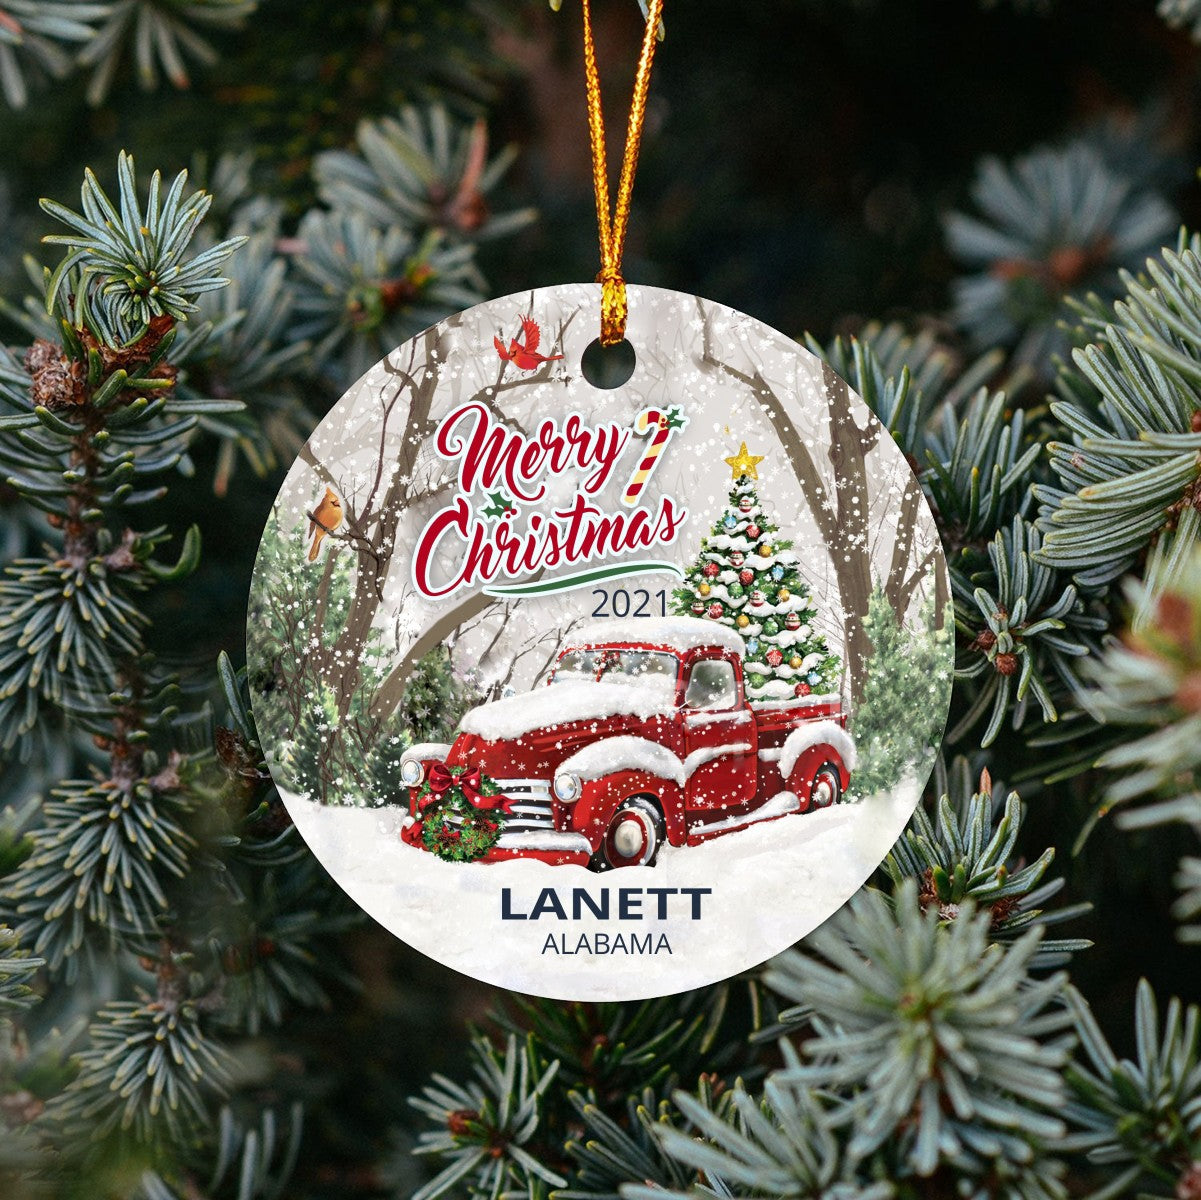 Christmas Tree Ornaments Lanett - Ornament Customize With Name City And State Lanett Alabama AL - Red Truck Xmas Ornaments 3'' Plastic Gift For Family, Friend And Housewarming